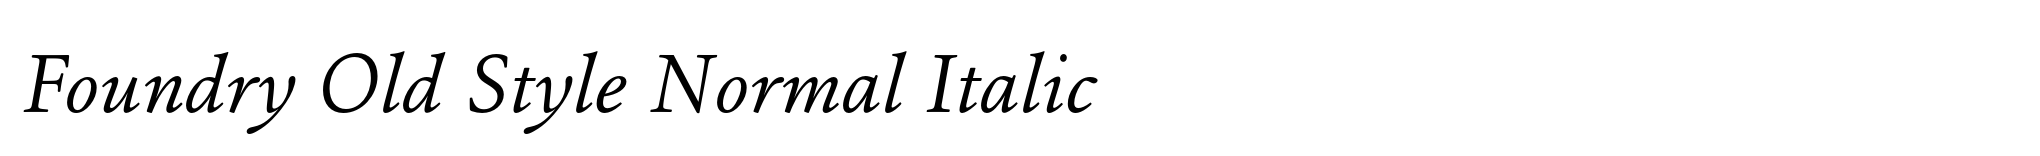 Foundry Old Style Normal Italic image